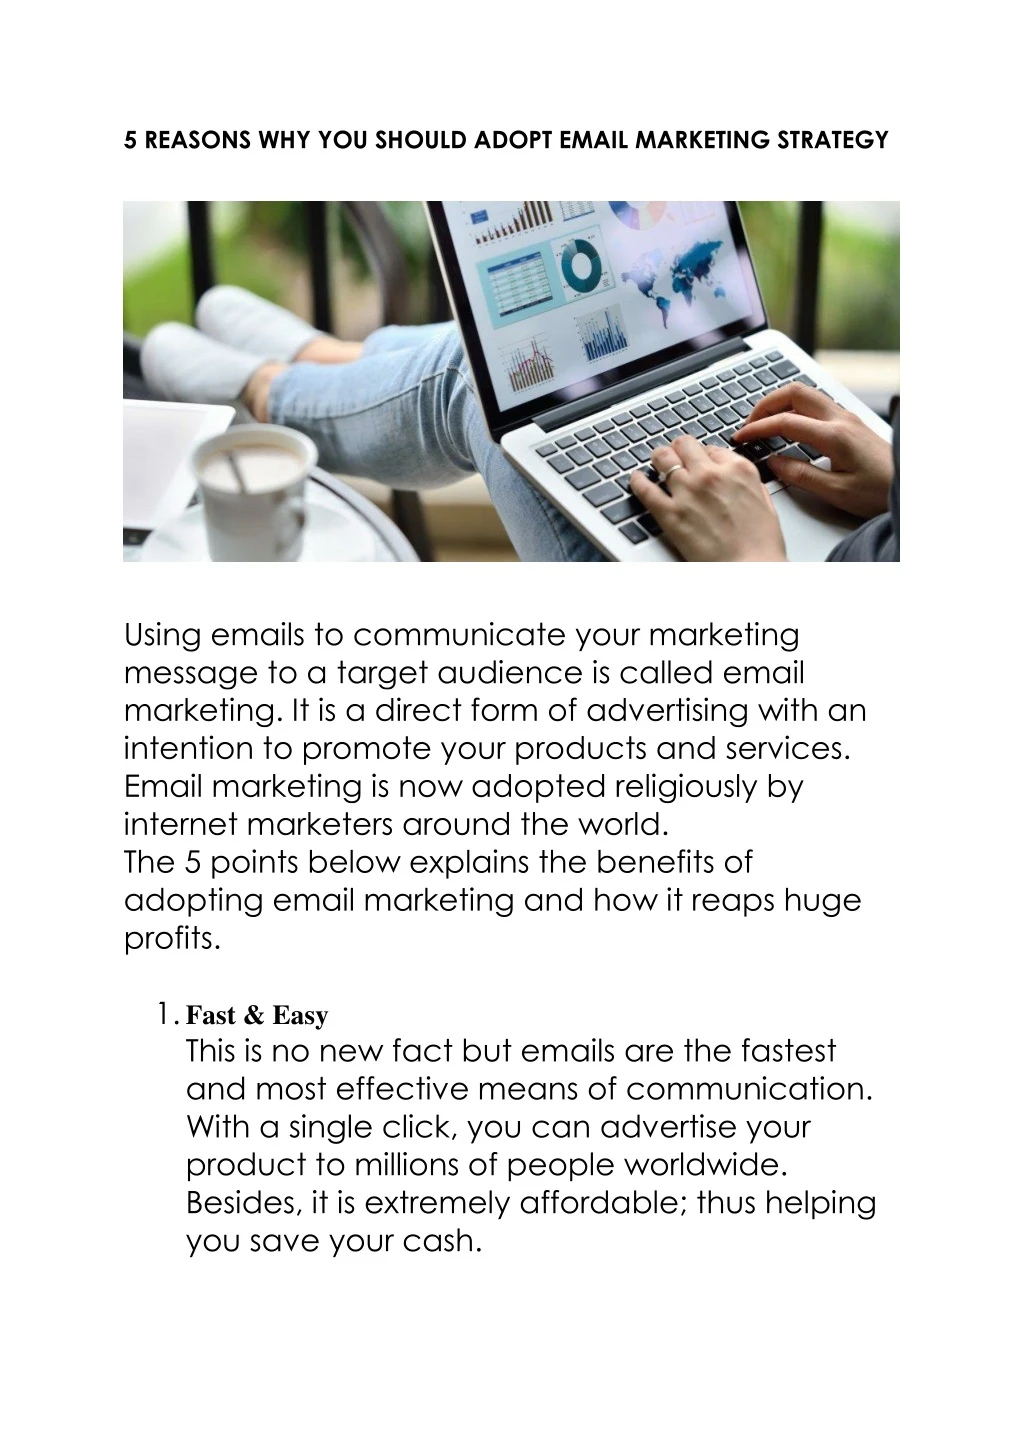 5 reasons why you should adopt email marketing